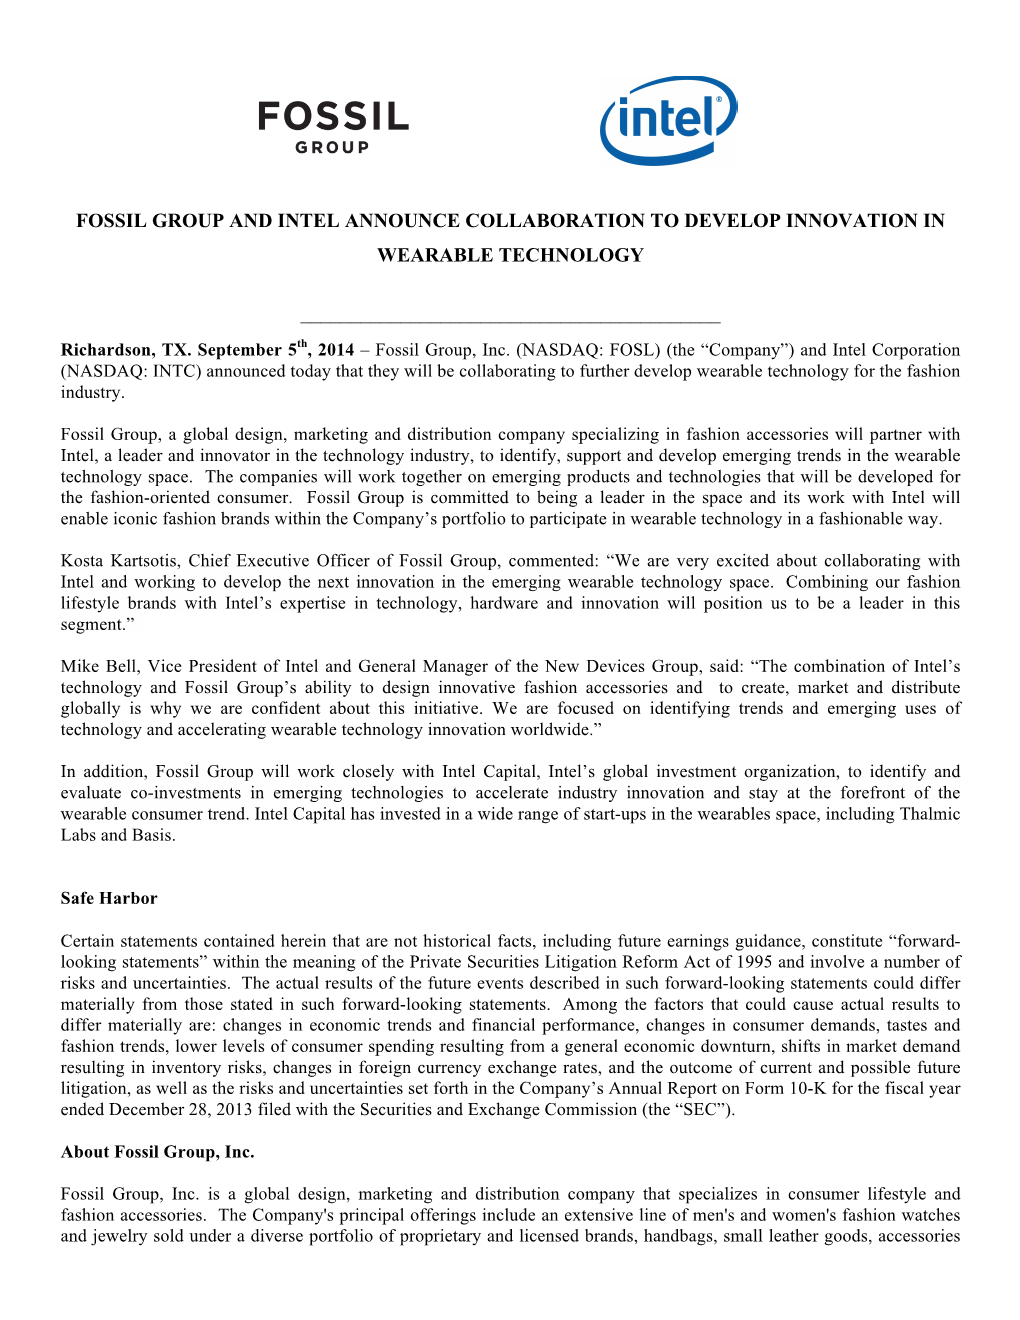 Fossil Group and Intel Announce Collaboration to Develop Innovation in Wearable Technology